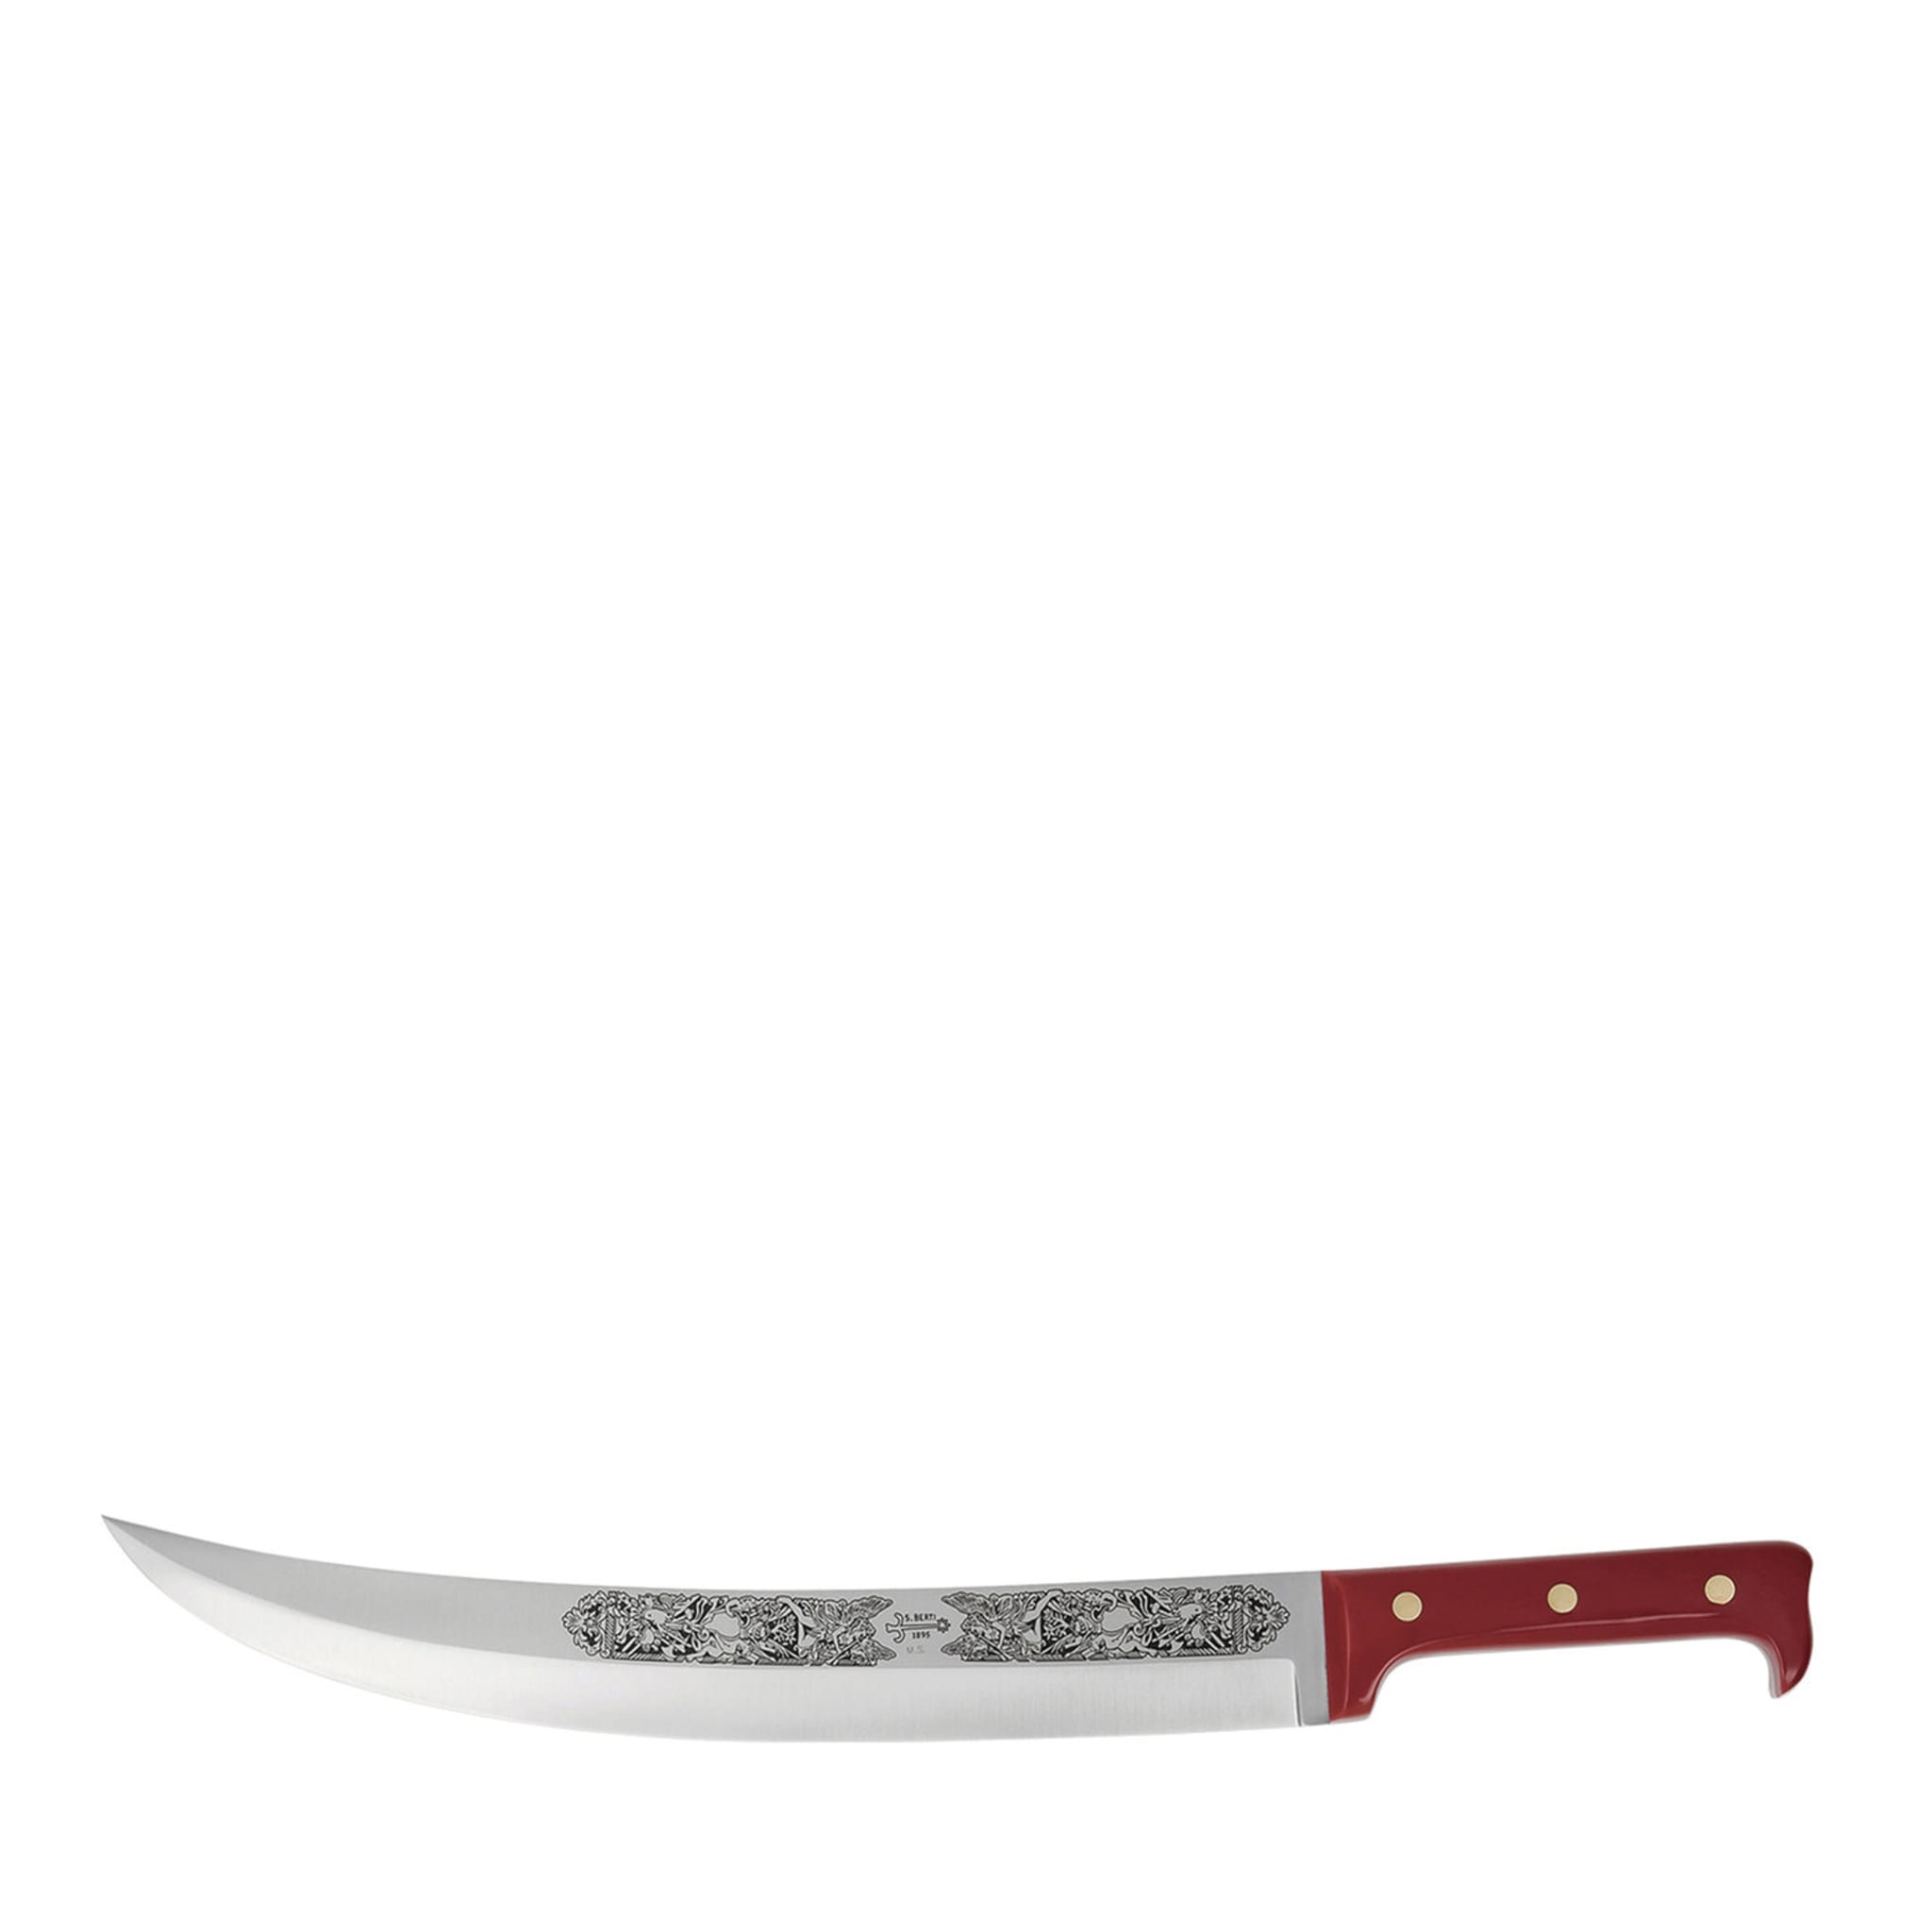 Saber Knife with Red Plaxiglass Handle - Main view